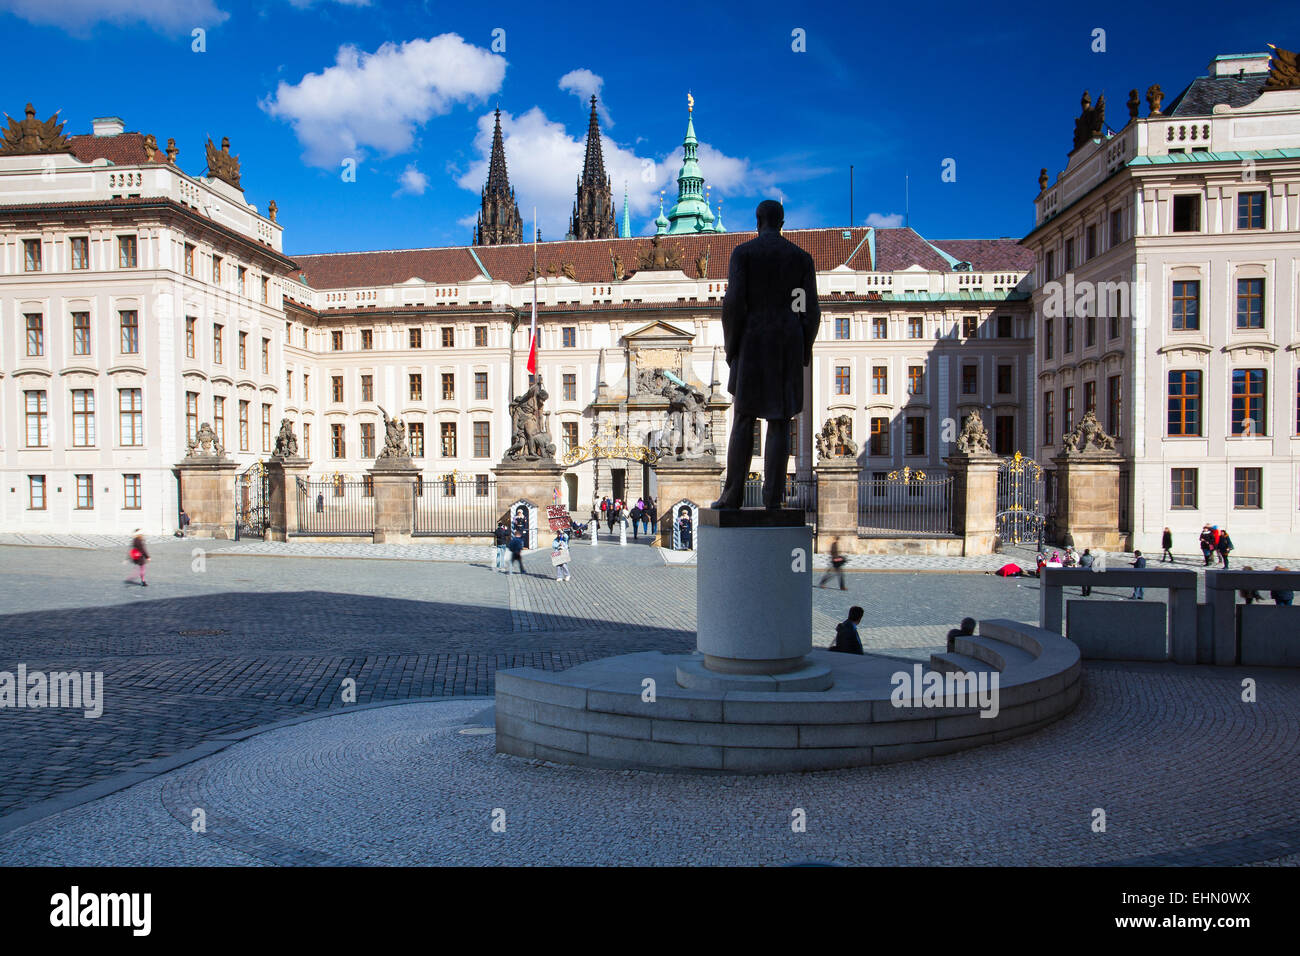 Prague,Czech Republic - March 4,2015: Monument of Tomas Garrique Masaryk, the first President of Czechoslovakia, Stock Photo